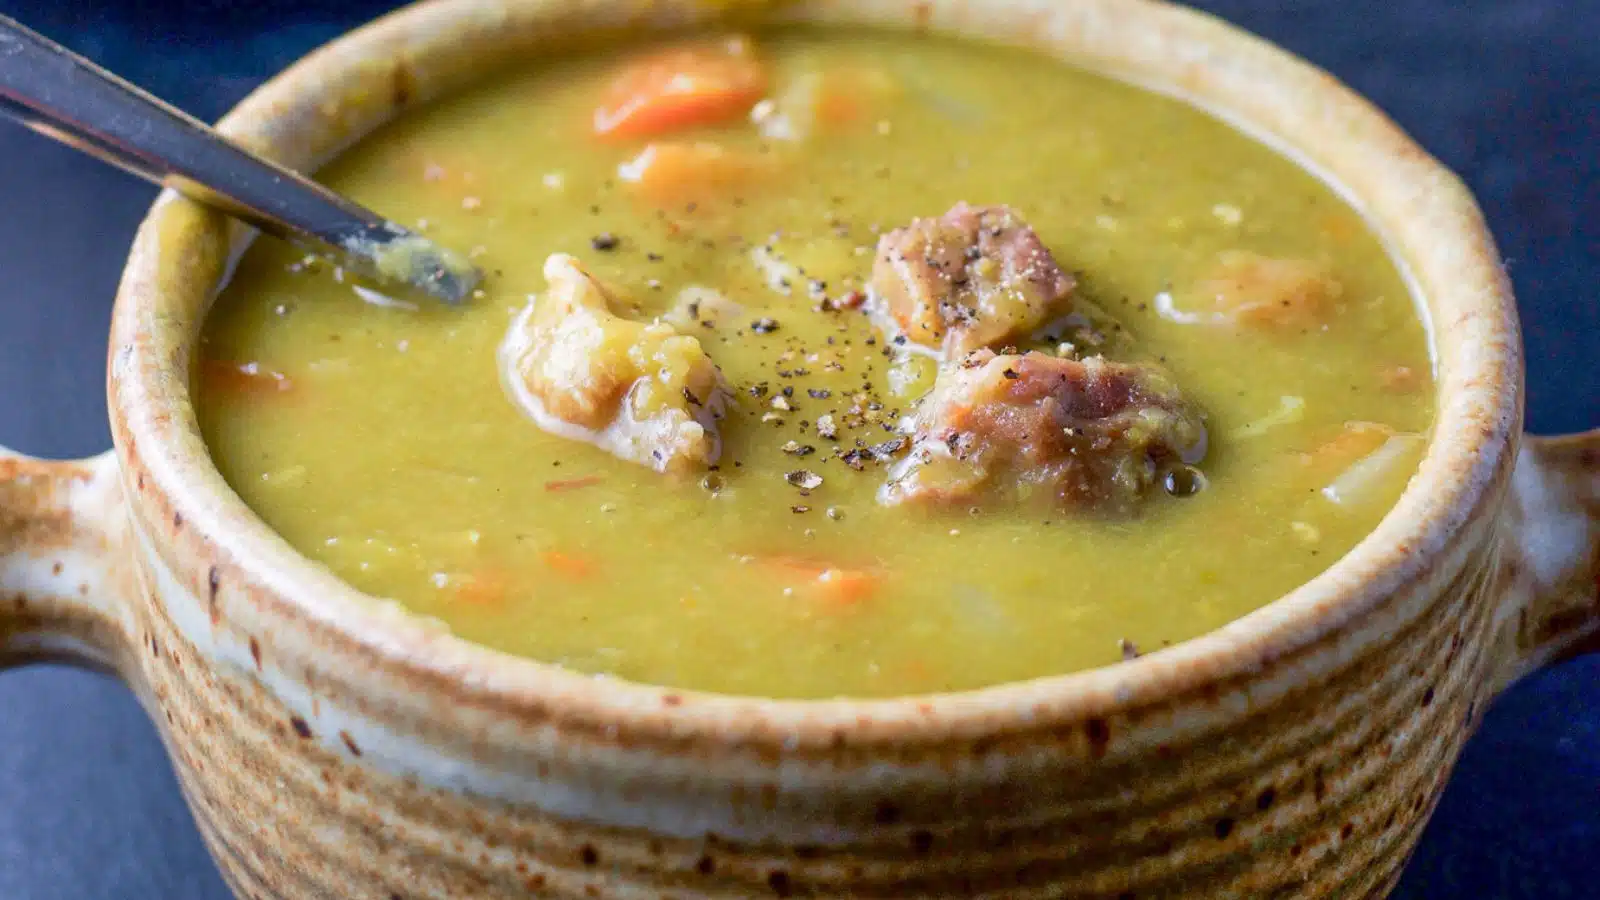 A crock with pea soup with ham in it, along with ground pepper and a spoon